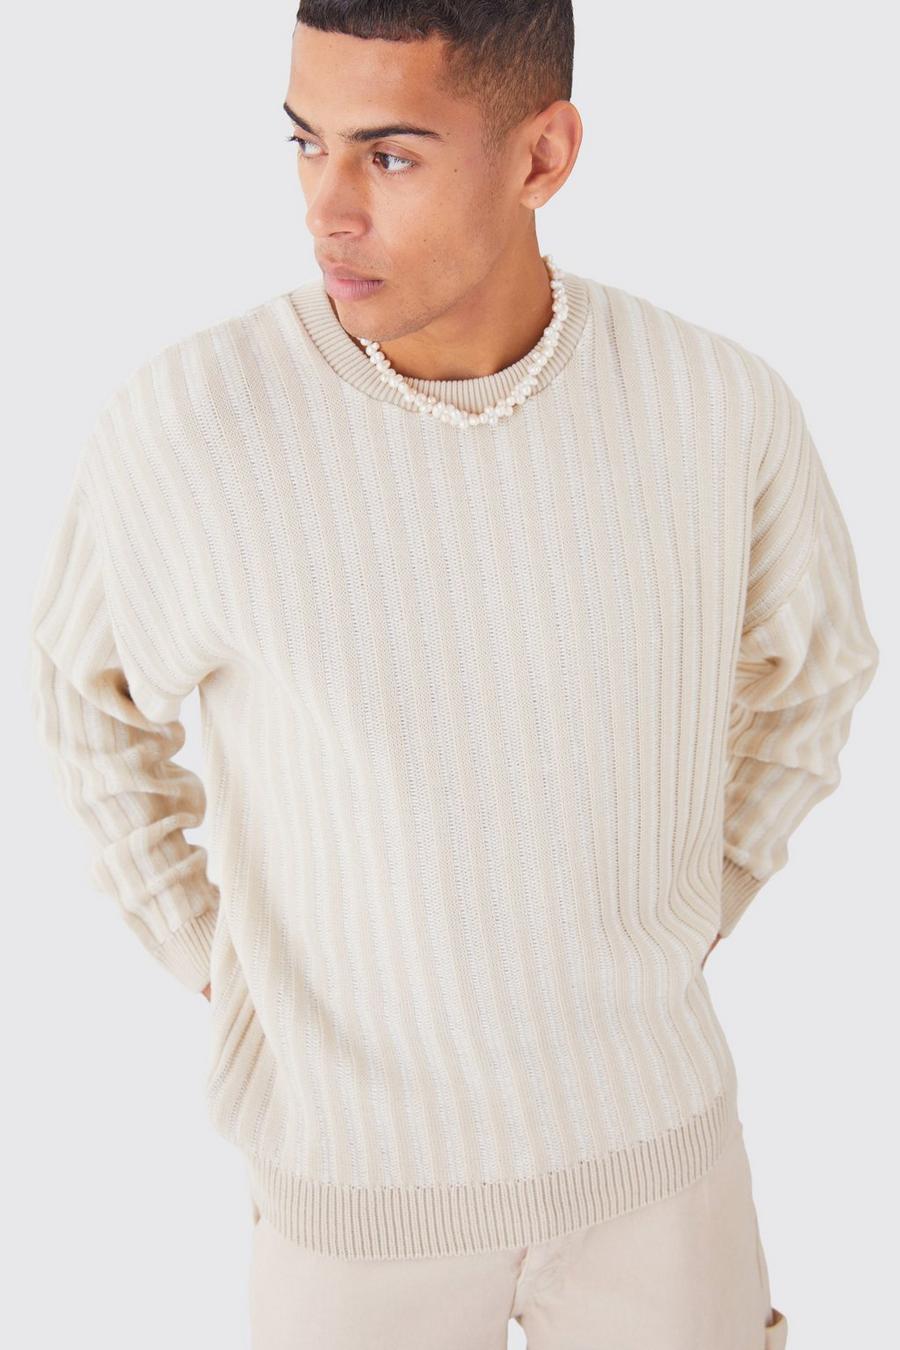 Stone Oversized Crew Neck Two Tone Rib Knitted Jumper